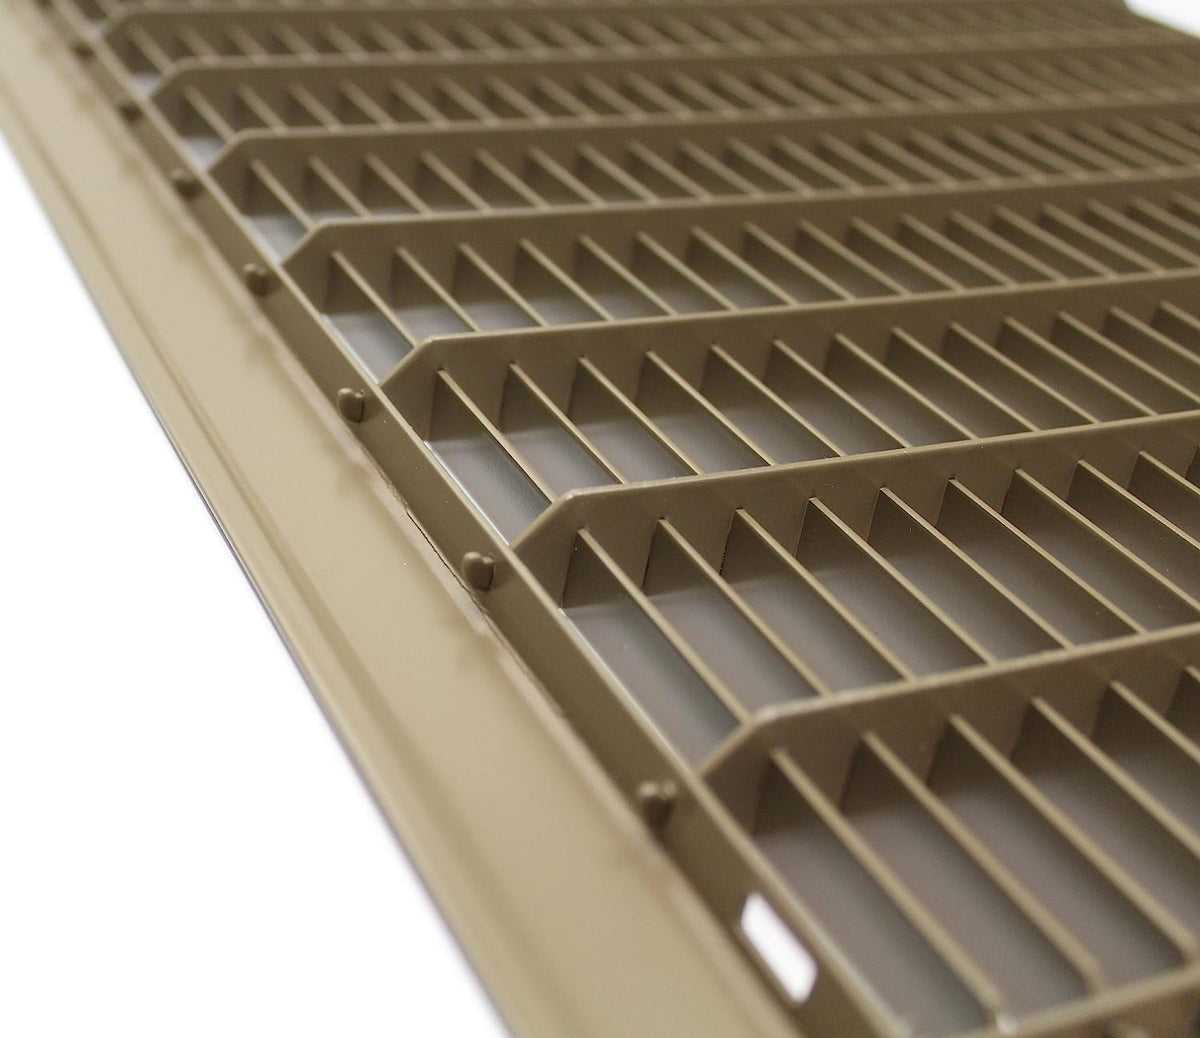 4&quot; X 30&quot; Or 30&quot; X 4&quot; Heavy Duty Floor Grille - Fixed Blades Air Grille - Brown [Outer Dimensions: [5.75 X 31.75]